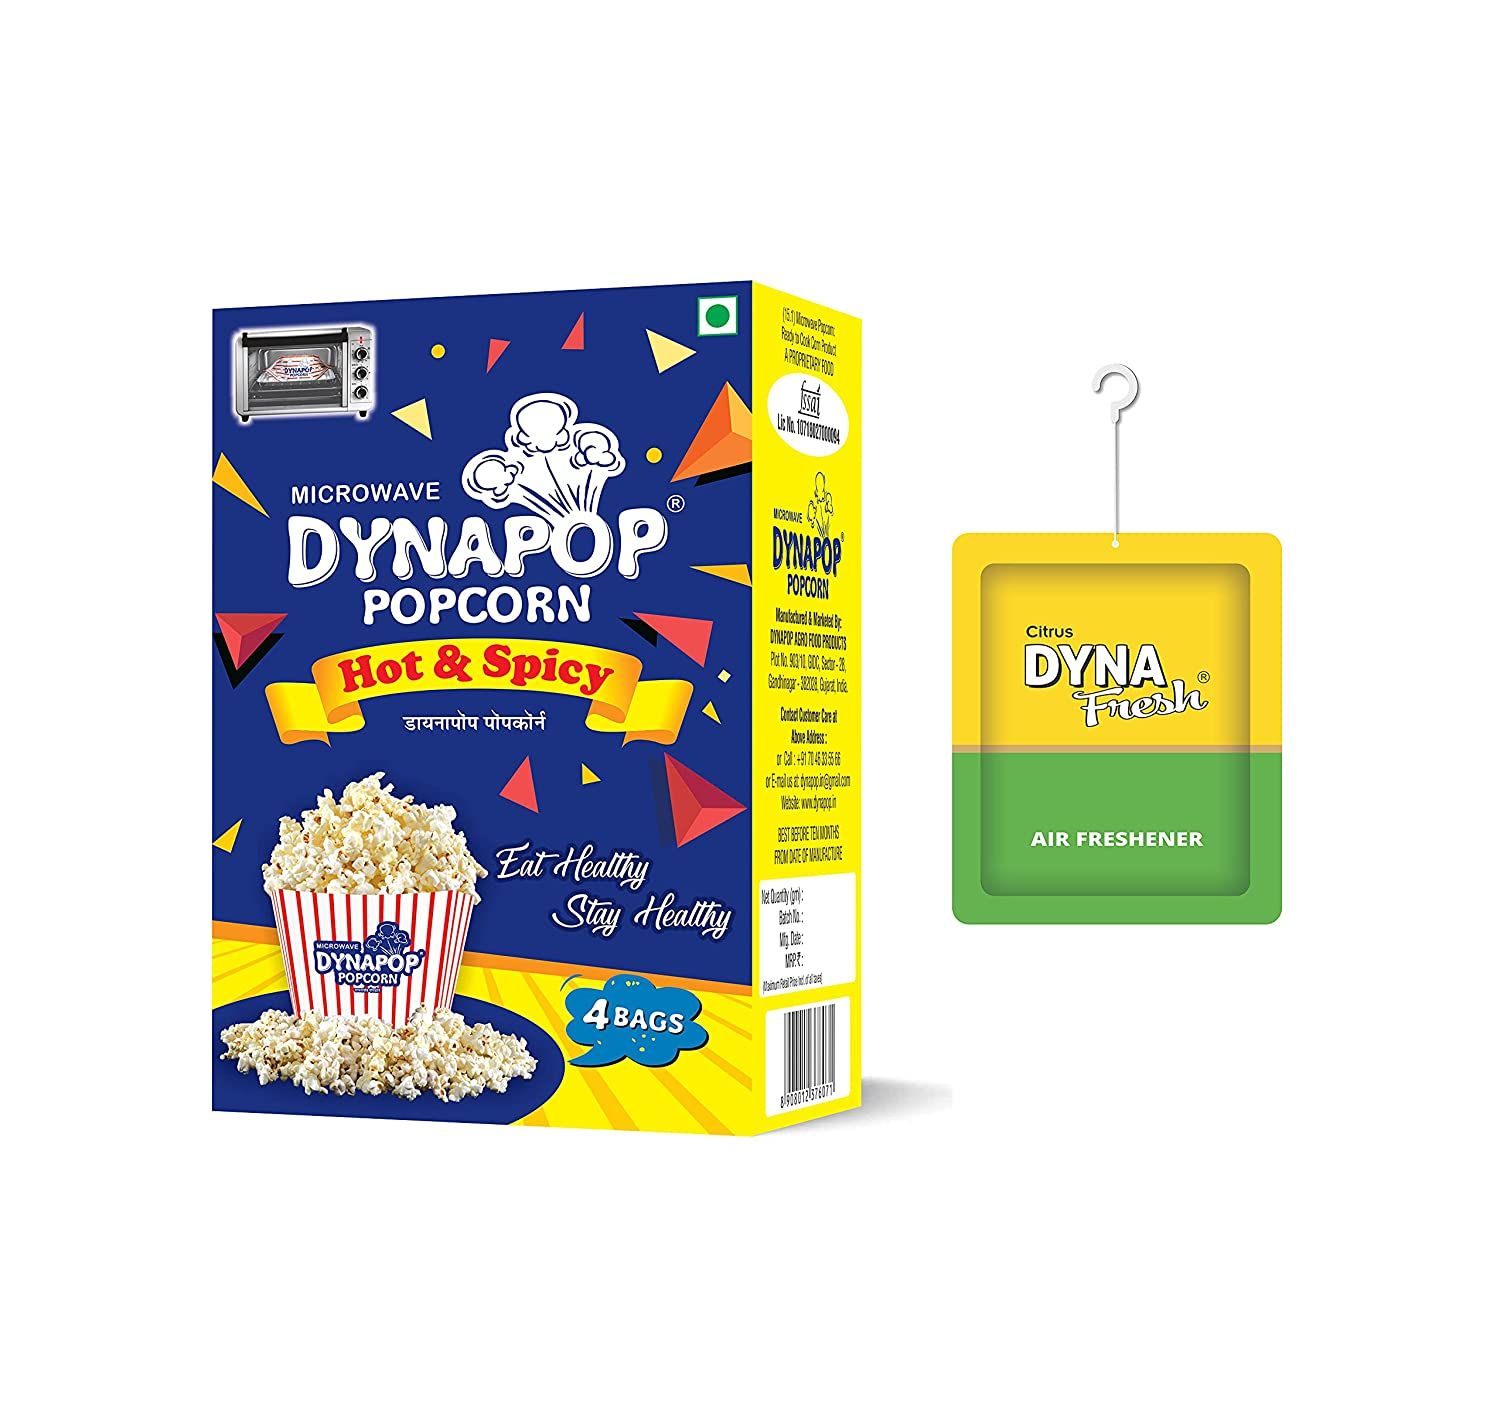 Dynapop Microwave Popcorn Hot & Spicy Image